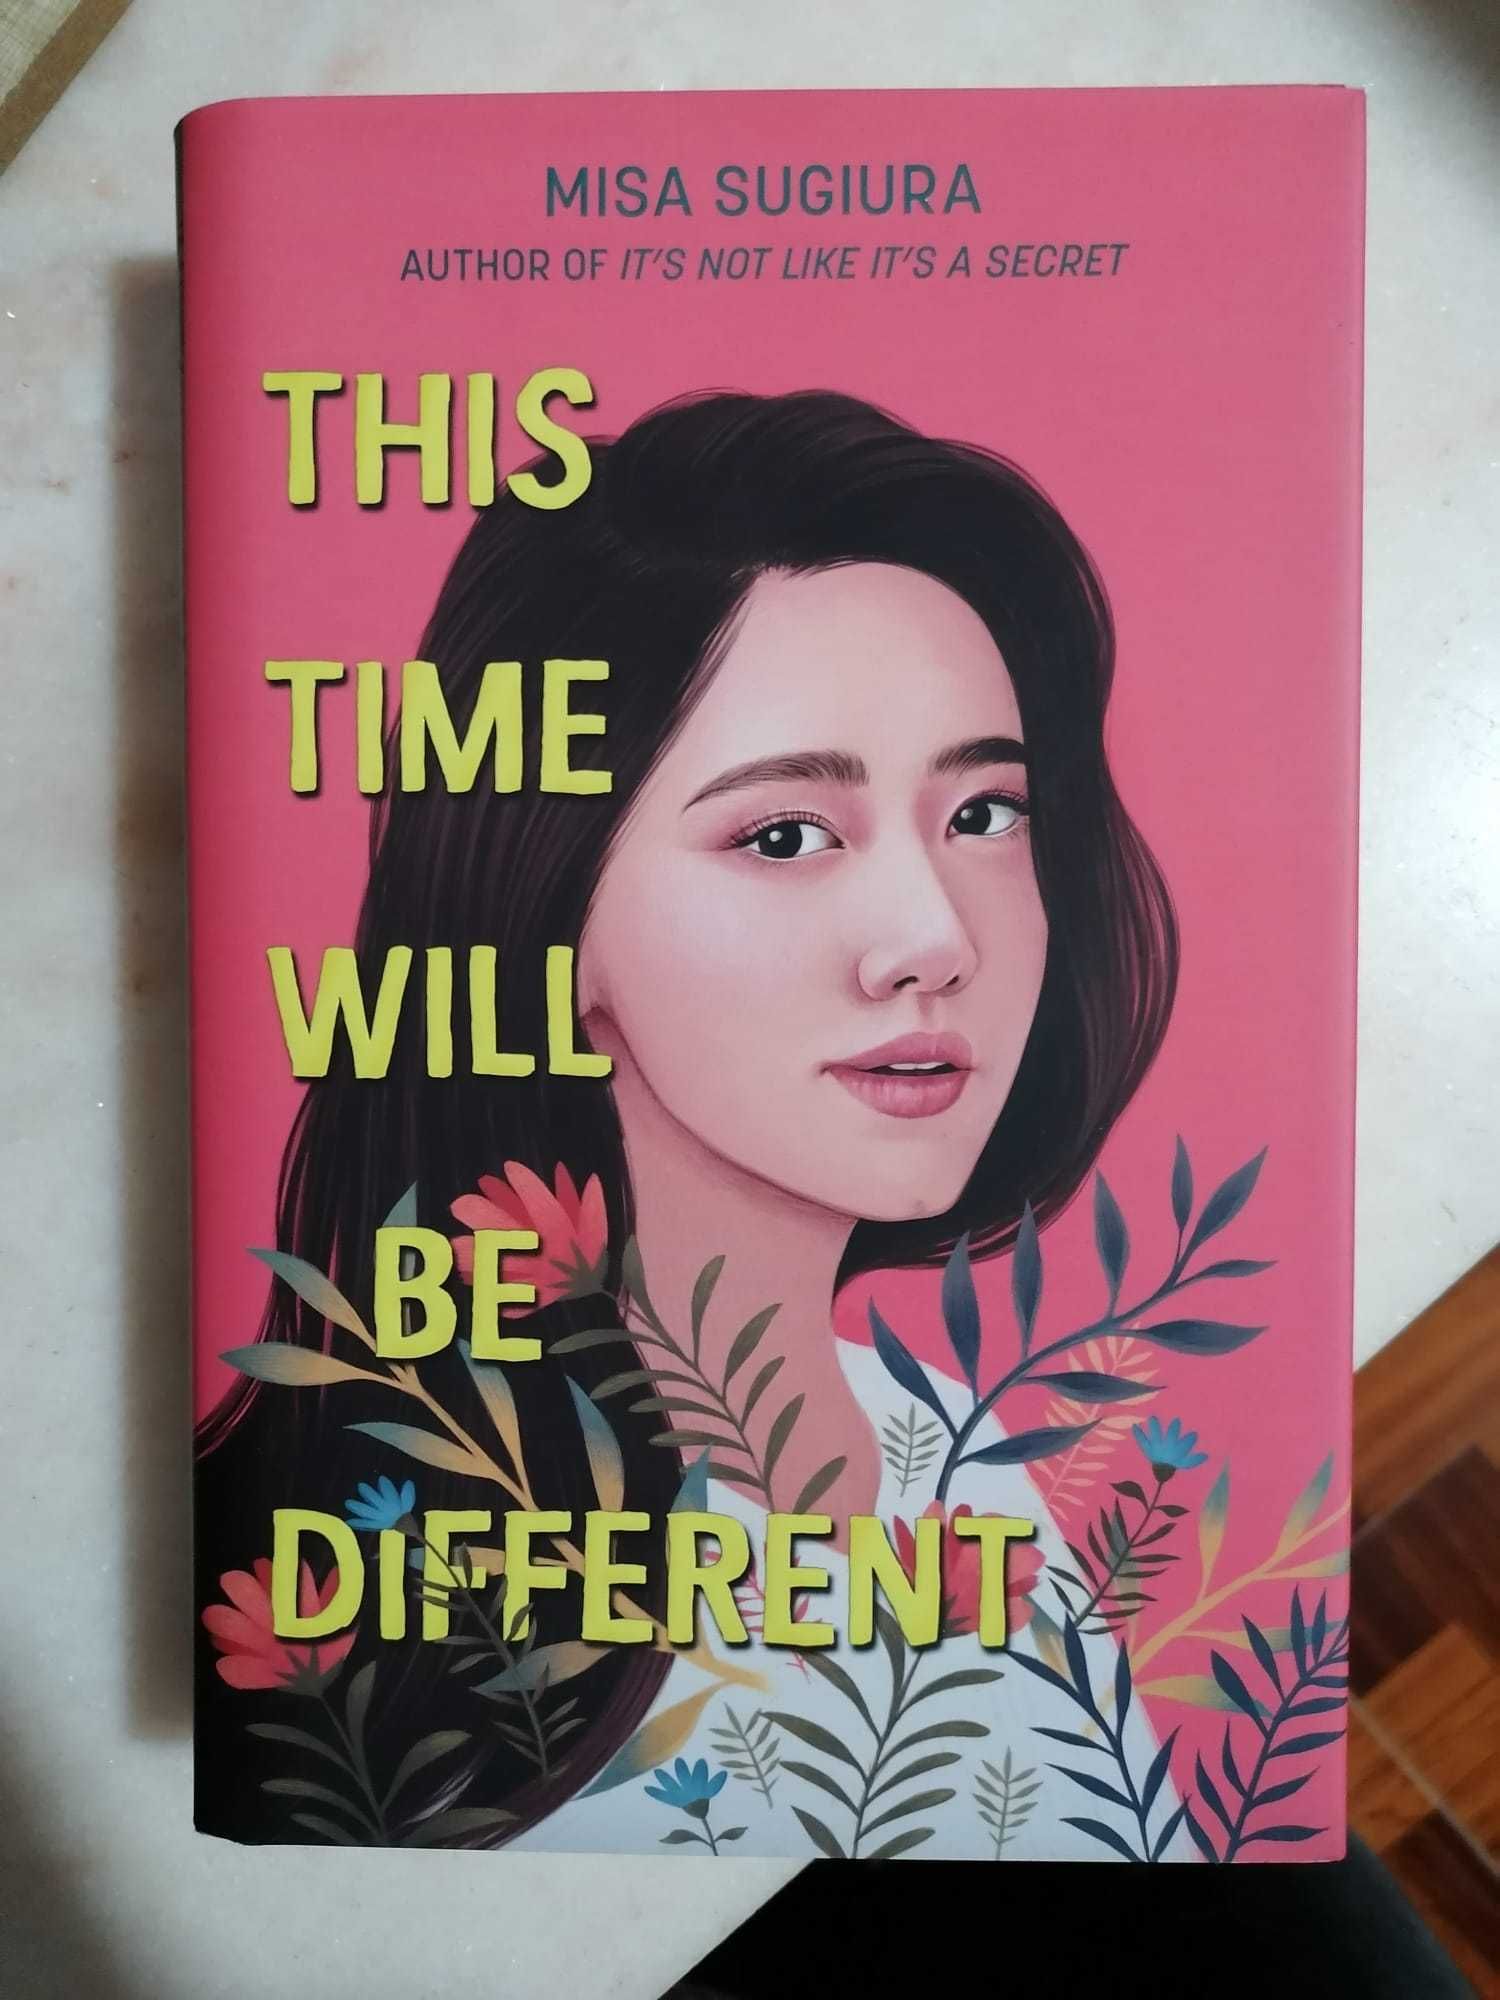 "This Time Will Be Different", Misa Sugiura